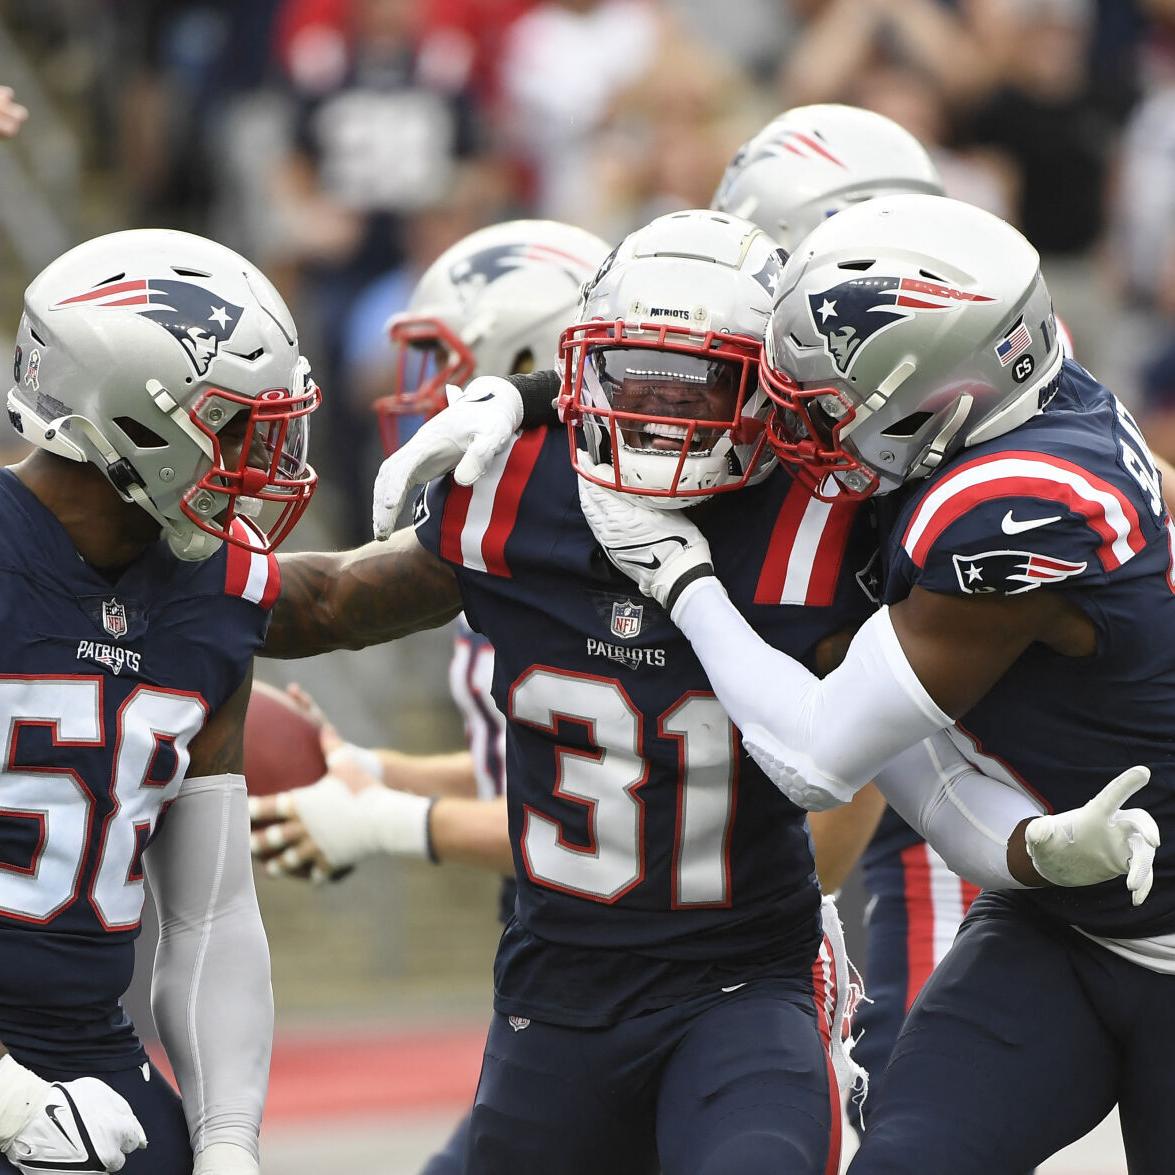 Pats get 9 sacks in dominant 26-3 victory over Colts